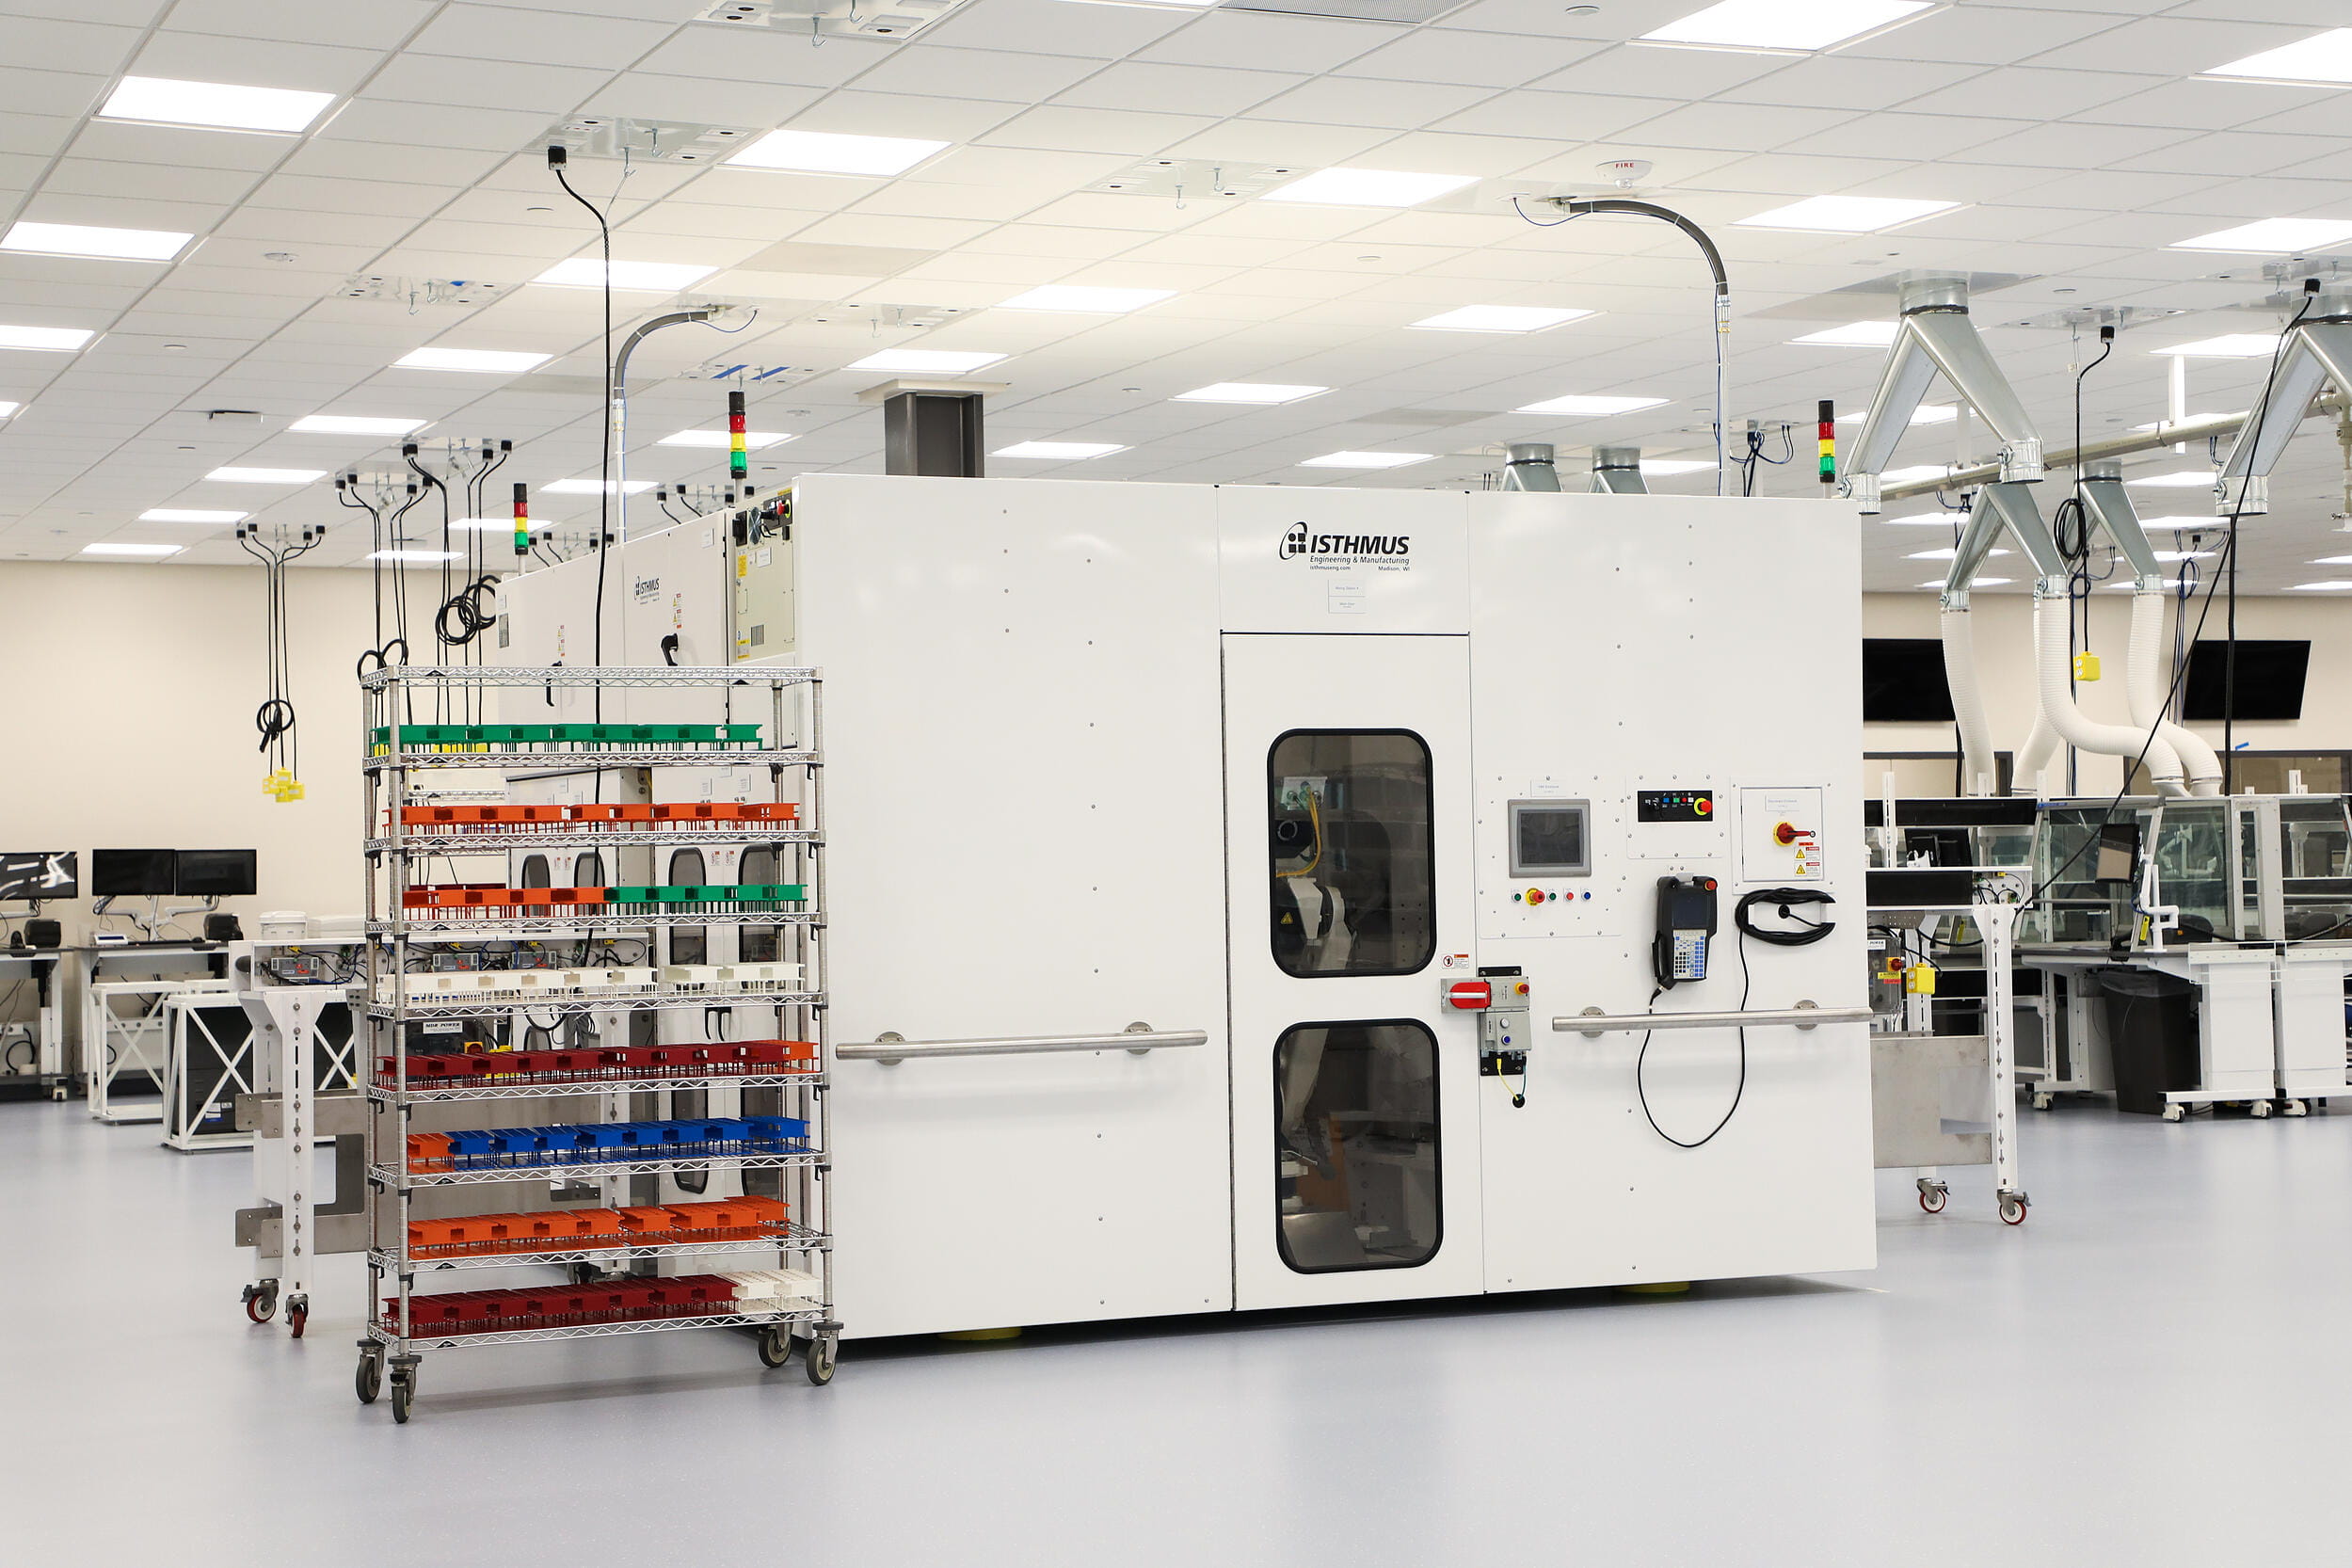 A large, automated mixing station is one component of the flexible, automated laboratory operations.